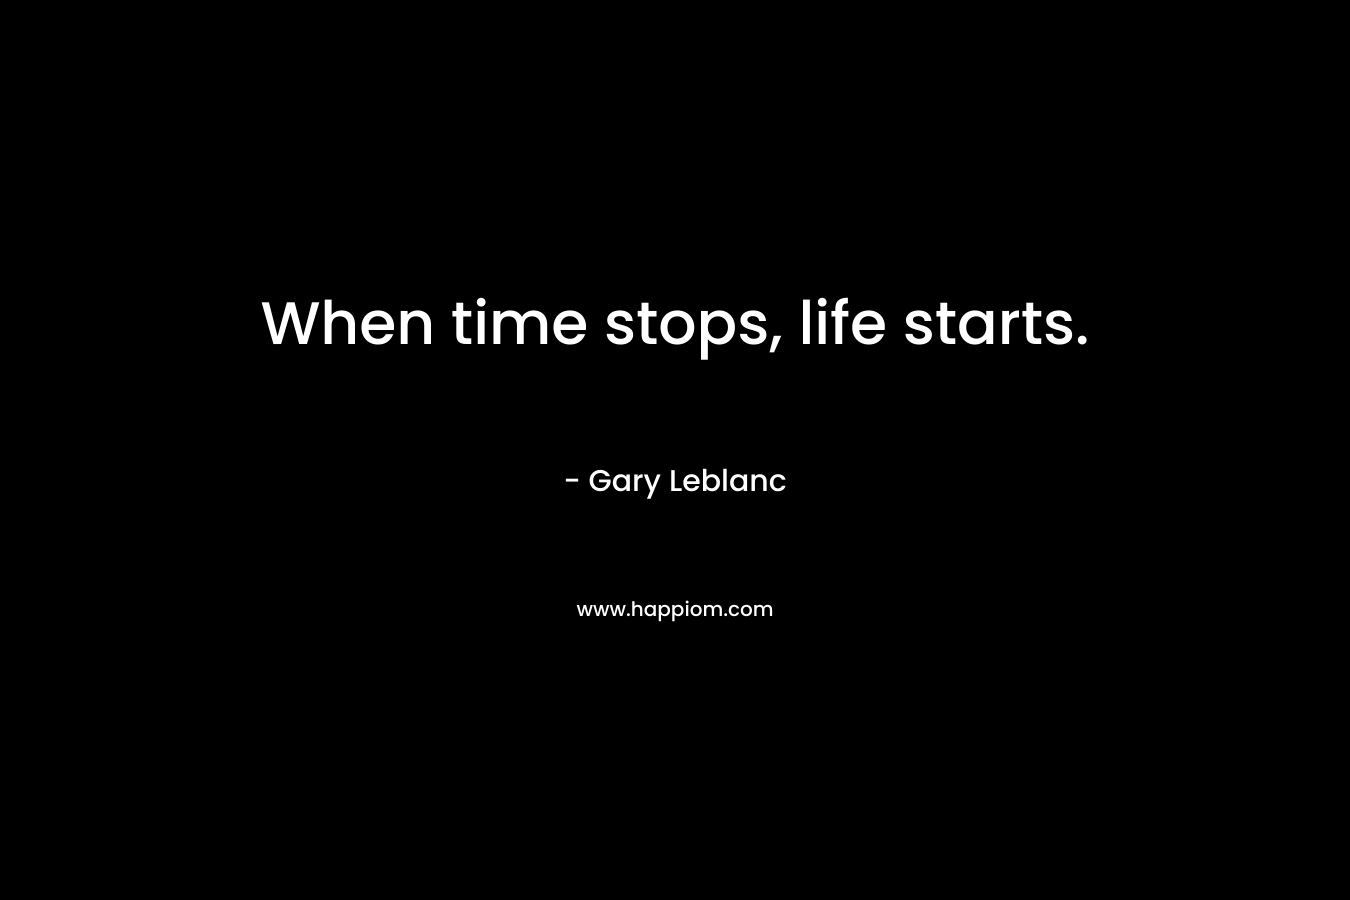 When time stops, life starts.